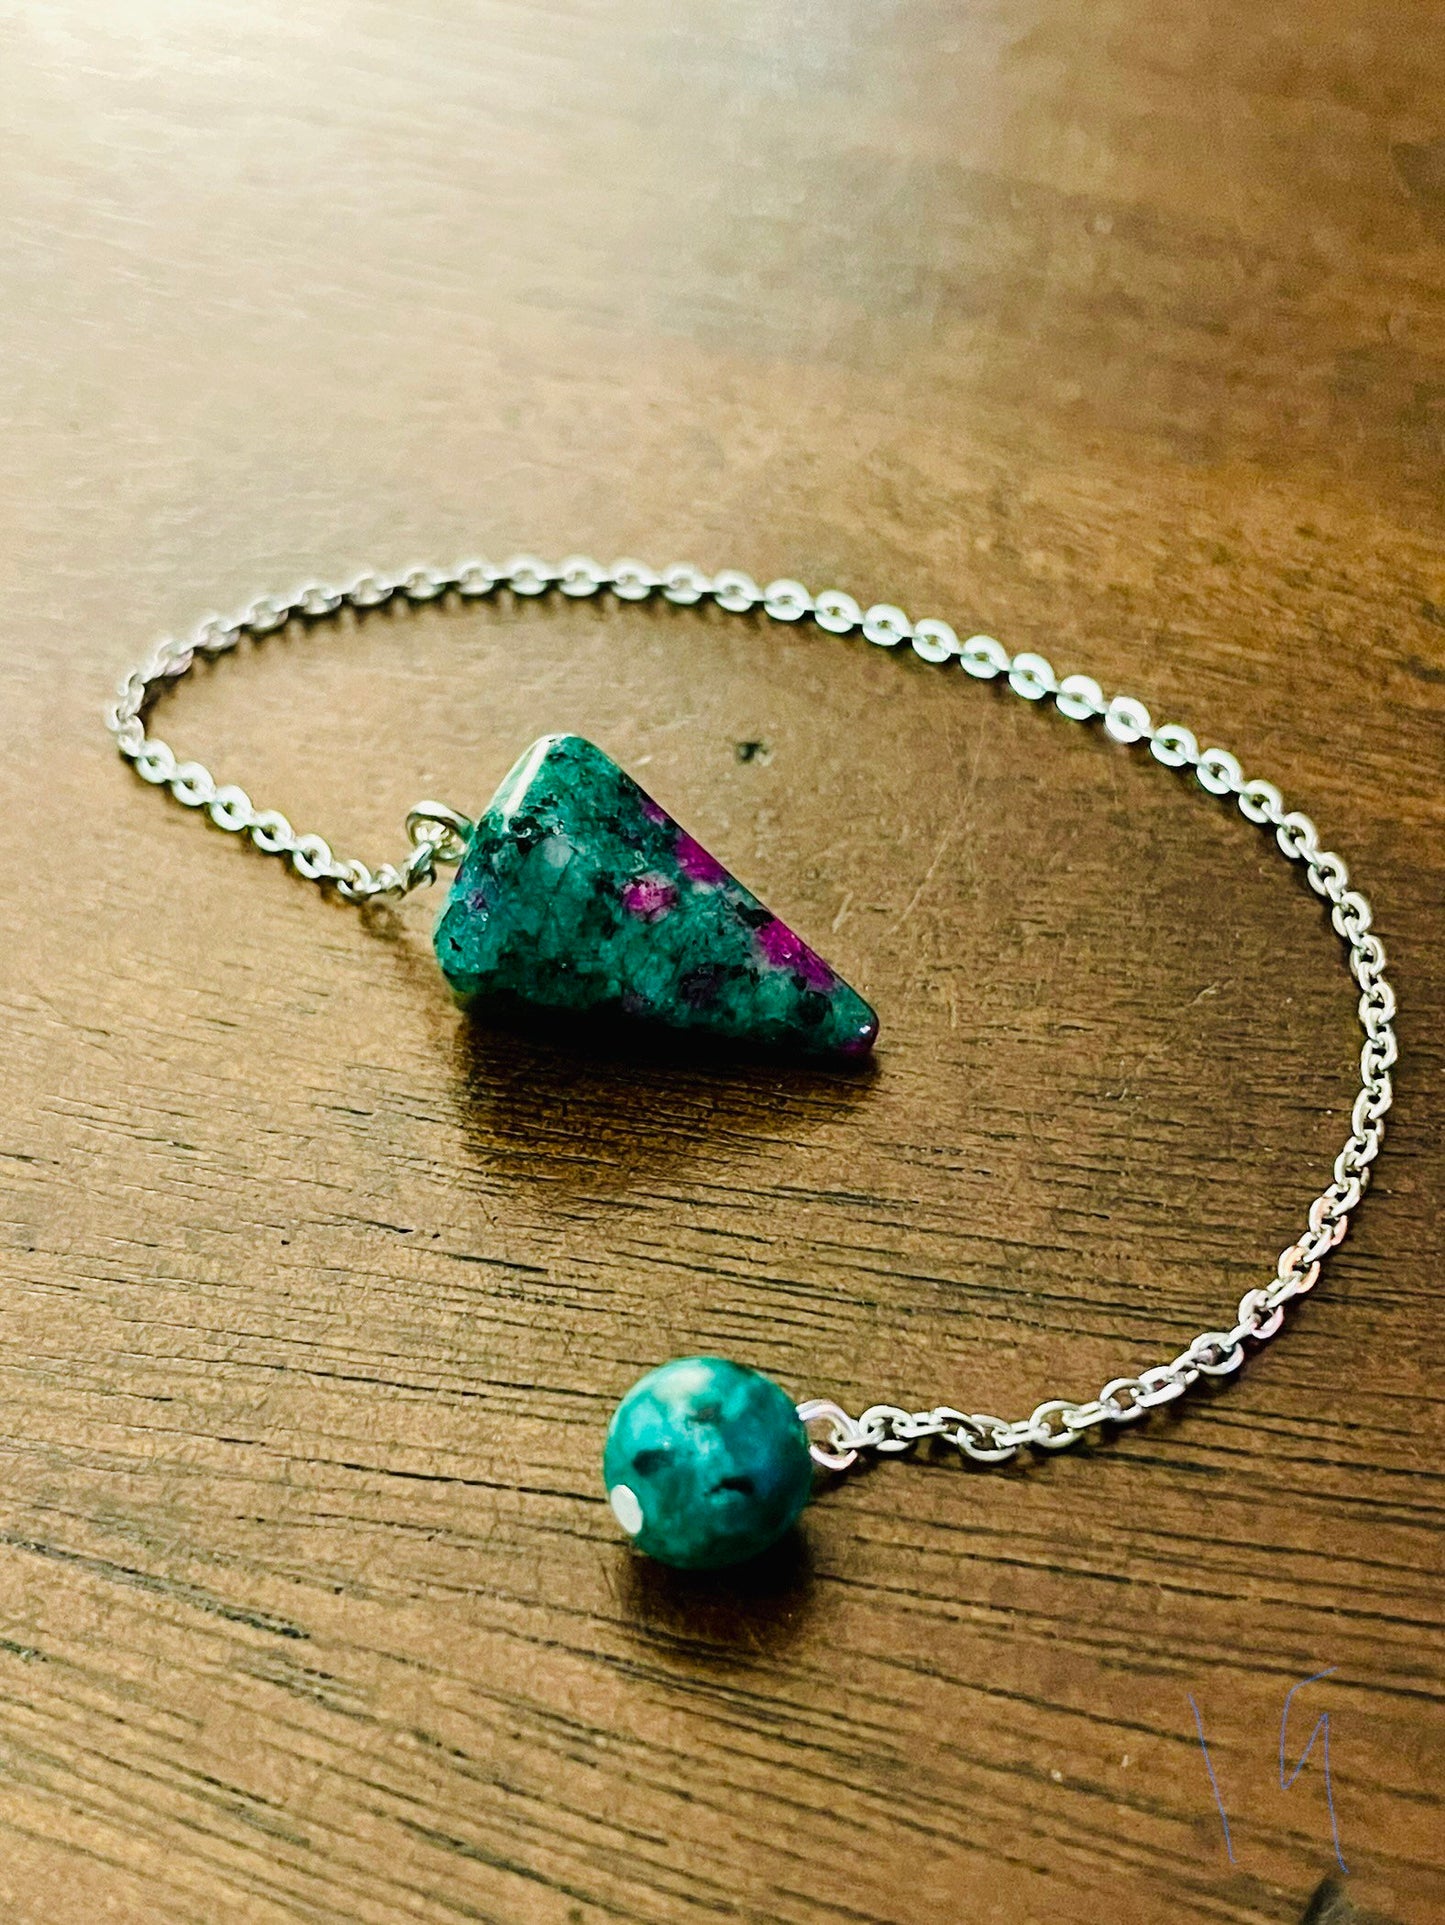 Crystal Pendulum #18, #19 - Ruby Zoisite - Stainless Steel Chain